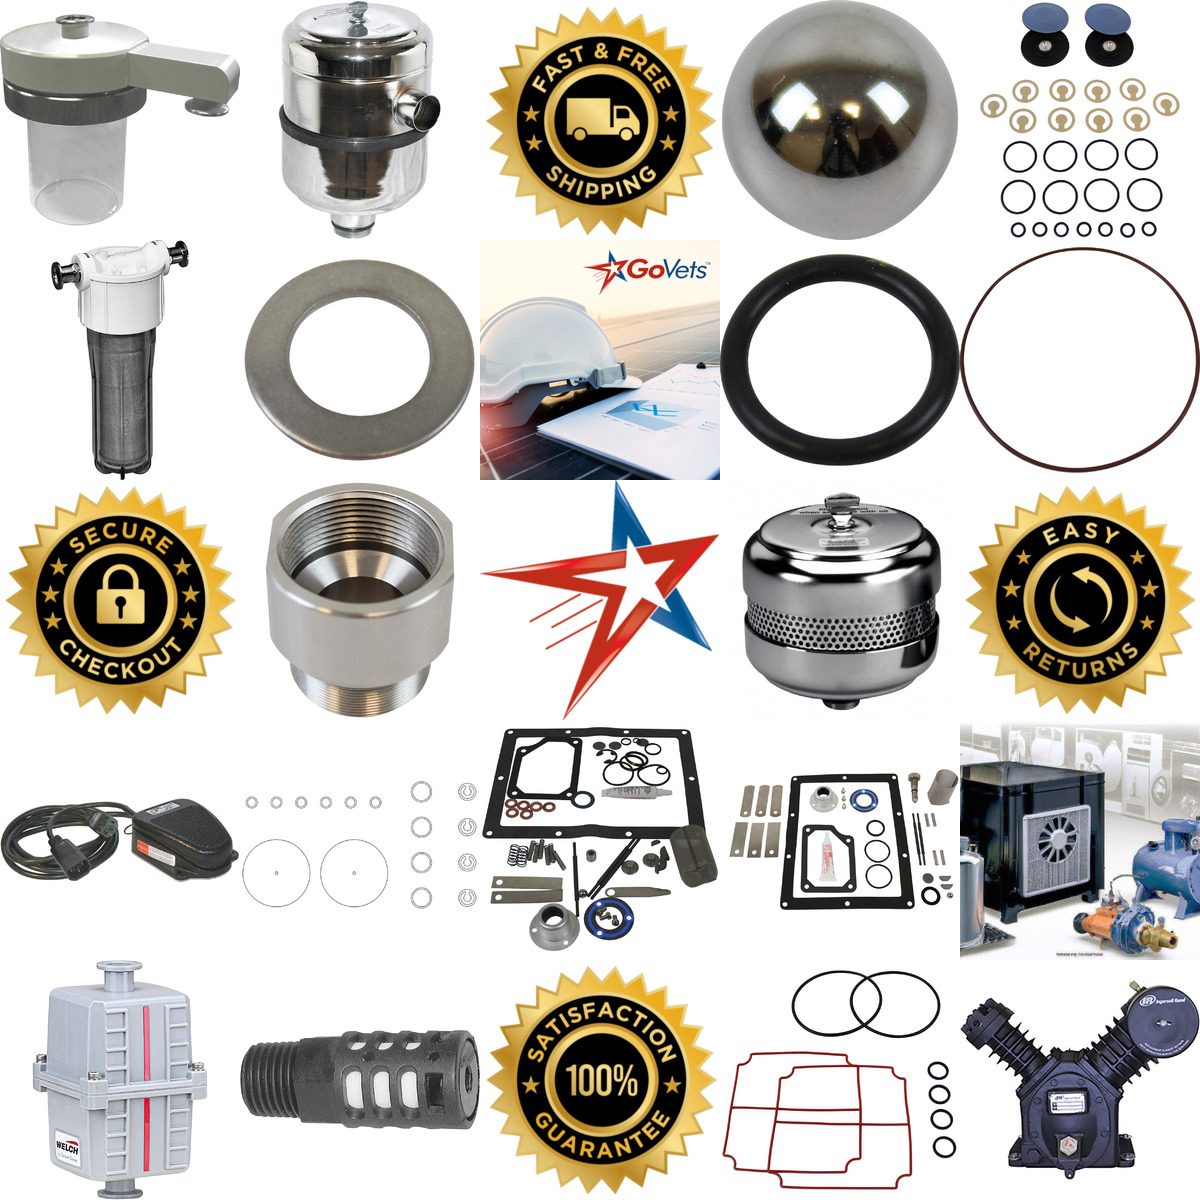 A selection of Air Compressor and Vacuum Pump Accessories products on GoVets